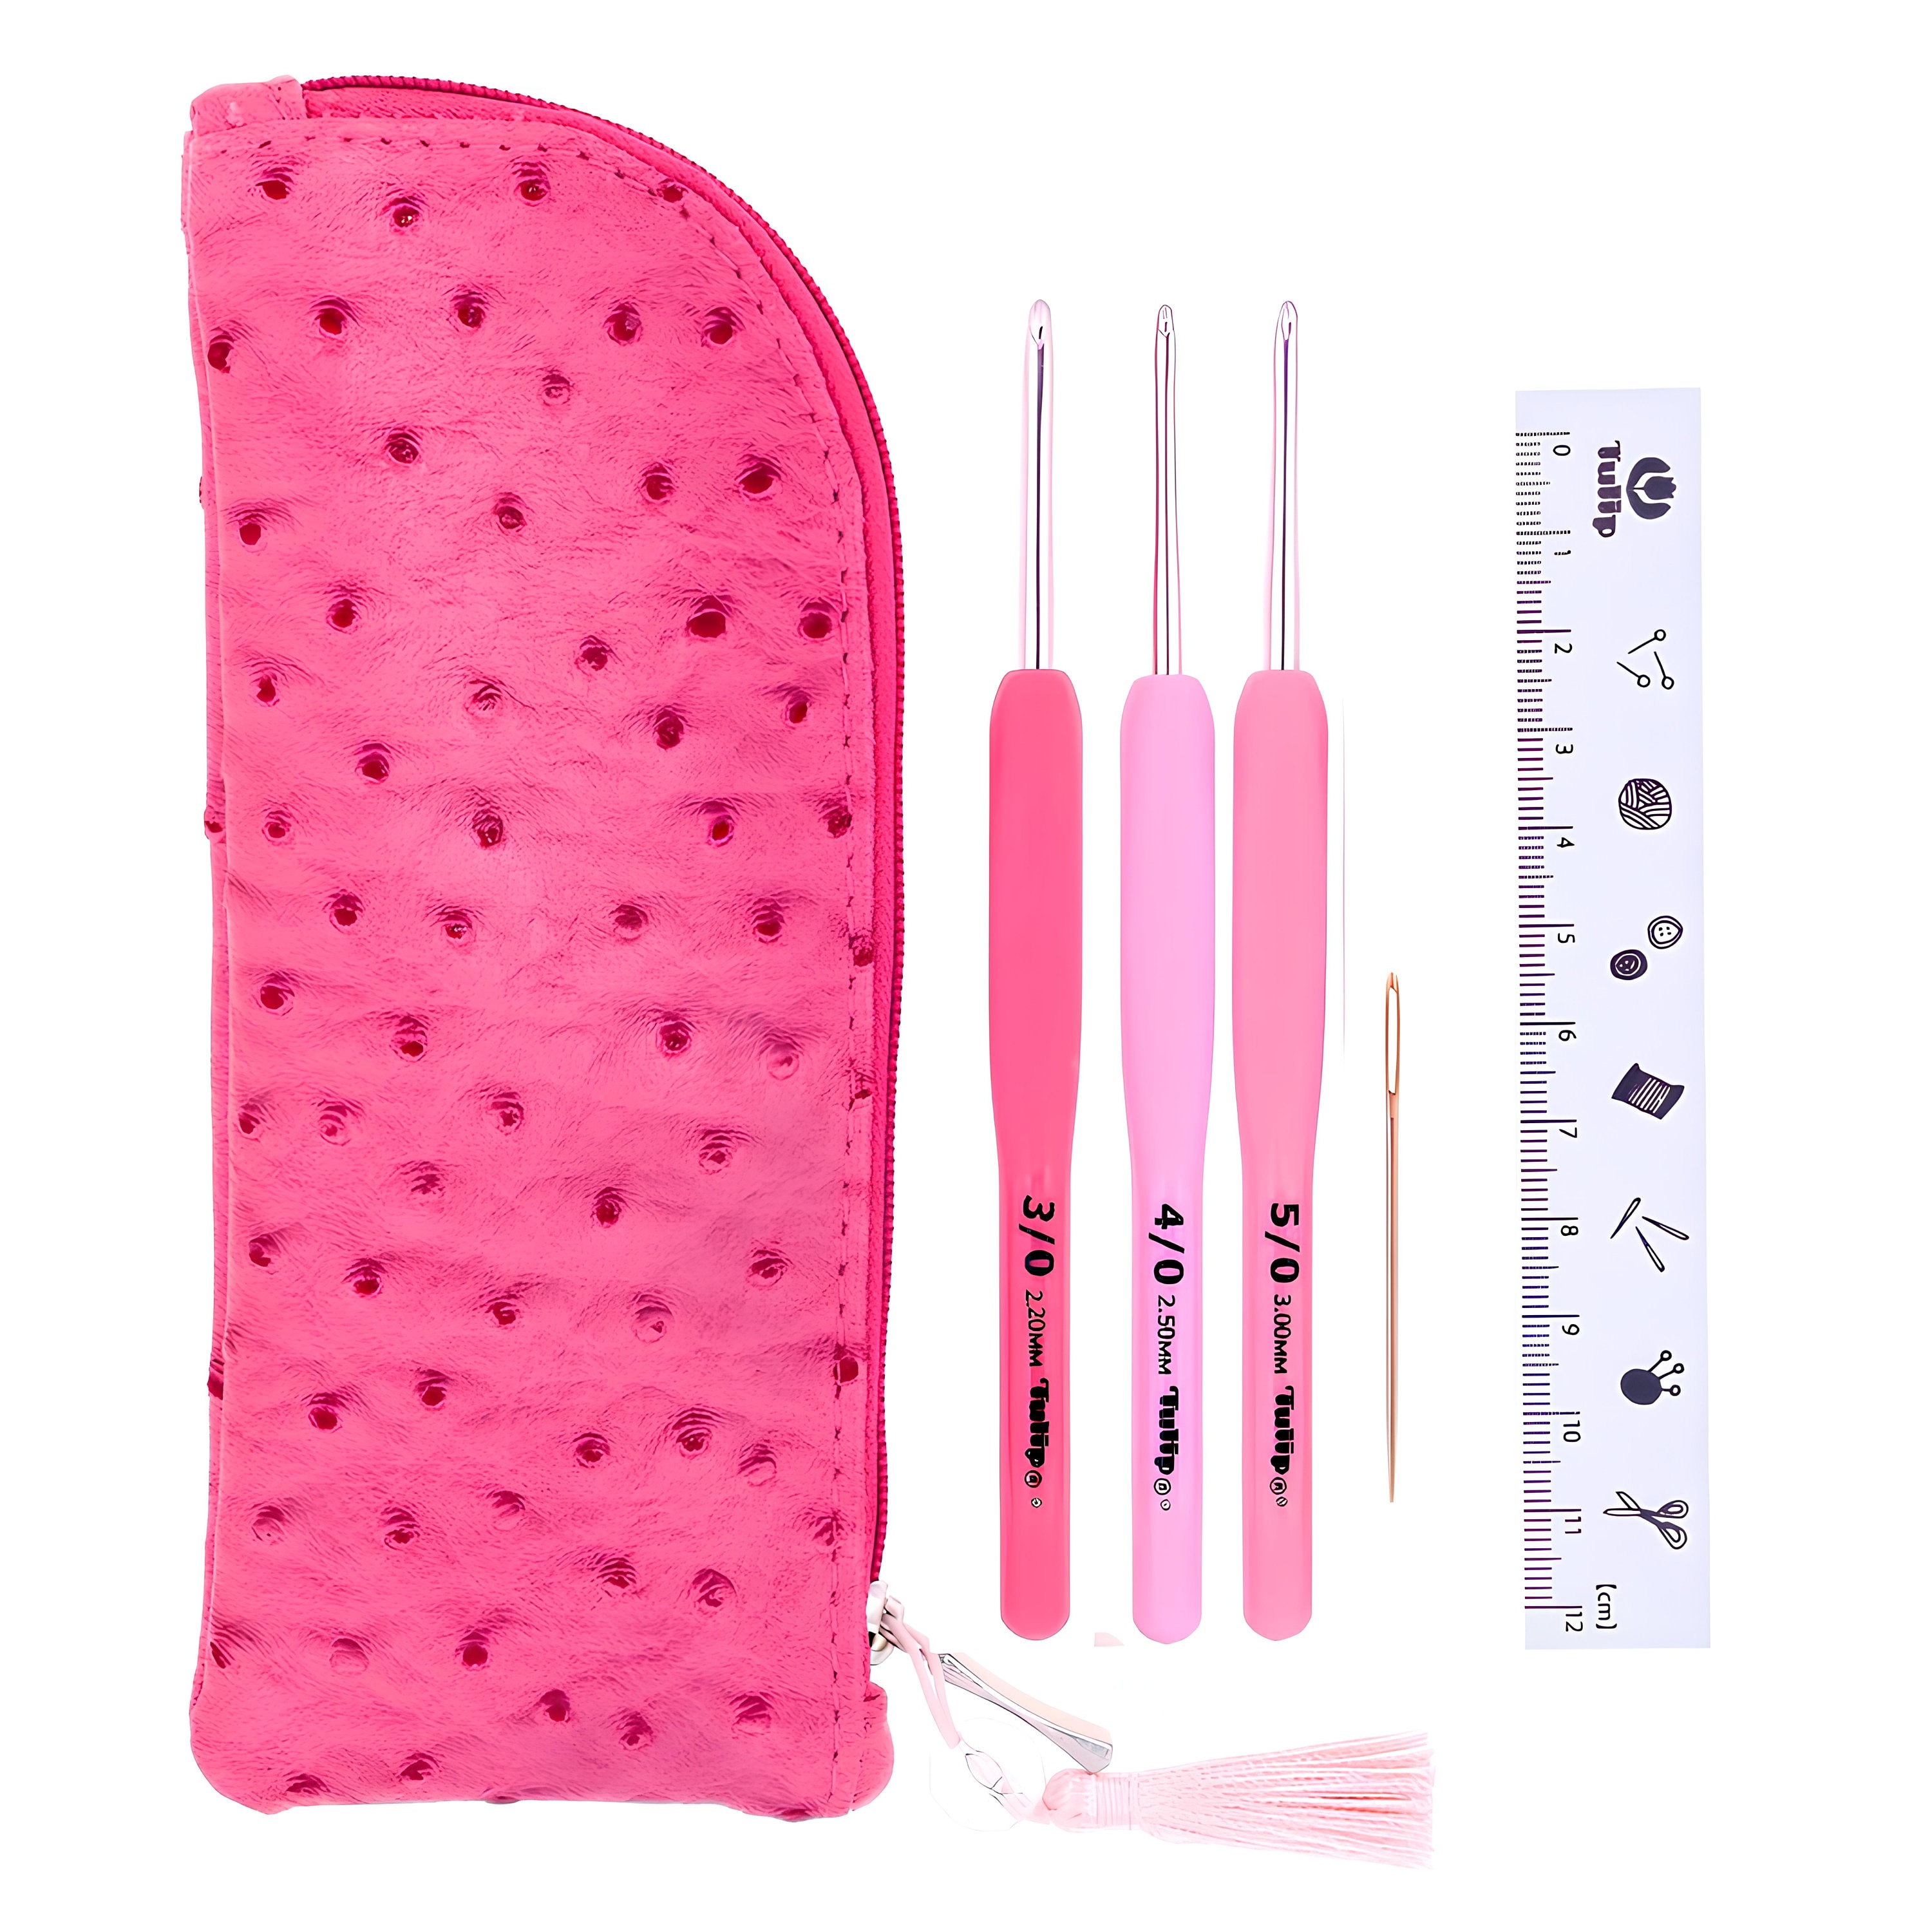 Tulip Etimo Rose Crochet Hooks Set in Small Case With Ruler and Yarn  Needle, Perfect Gift for Crocheters, 4/0, 5/0, 6/0 2.5, 3.0, 3.5mm, 